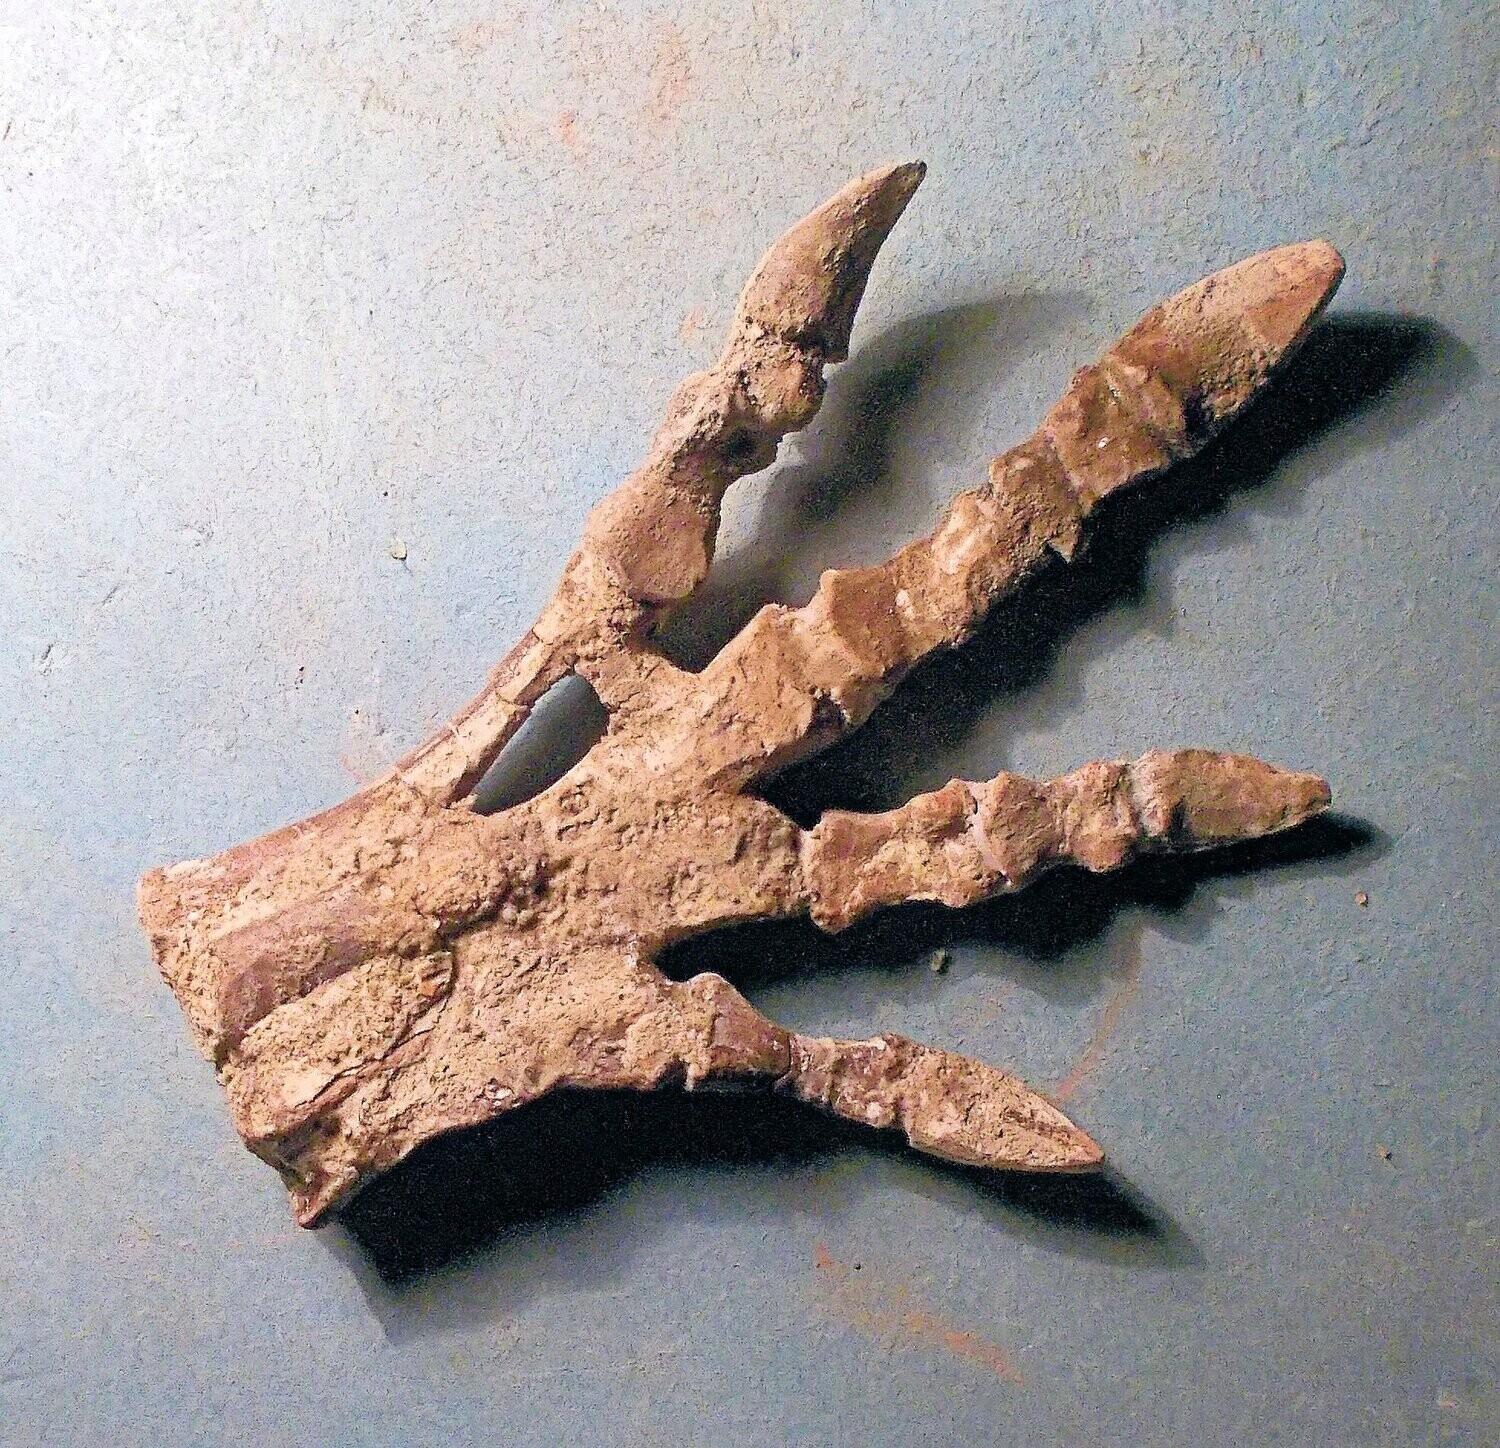 Excellent articulated 11cm X 8cm hind foot of Psittacosaurus mazongshensis  Yu 1997, from the Lower Xinminbao Formation of Ganzu Province, China.